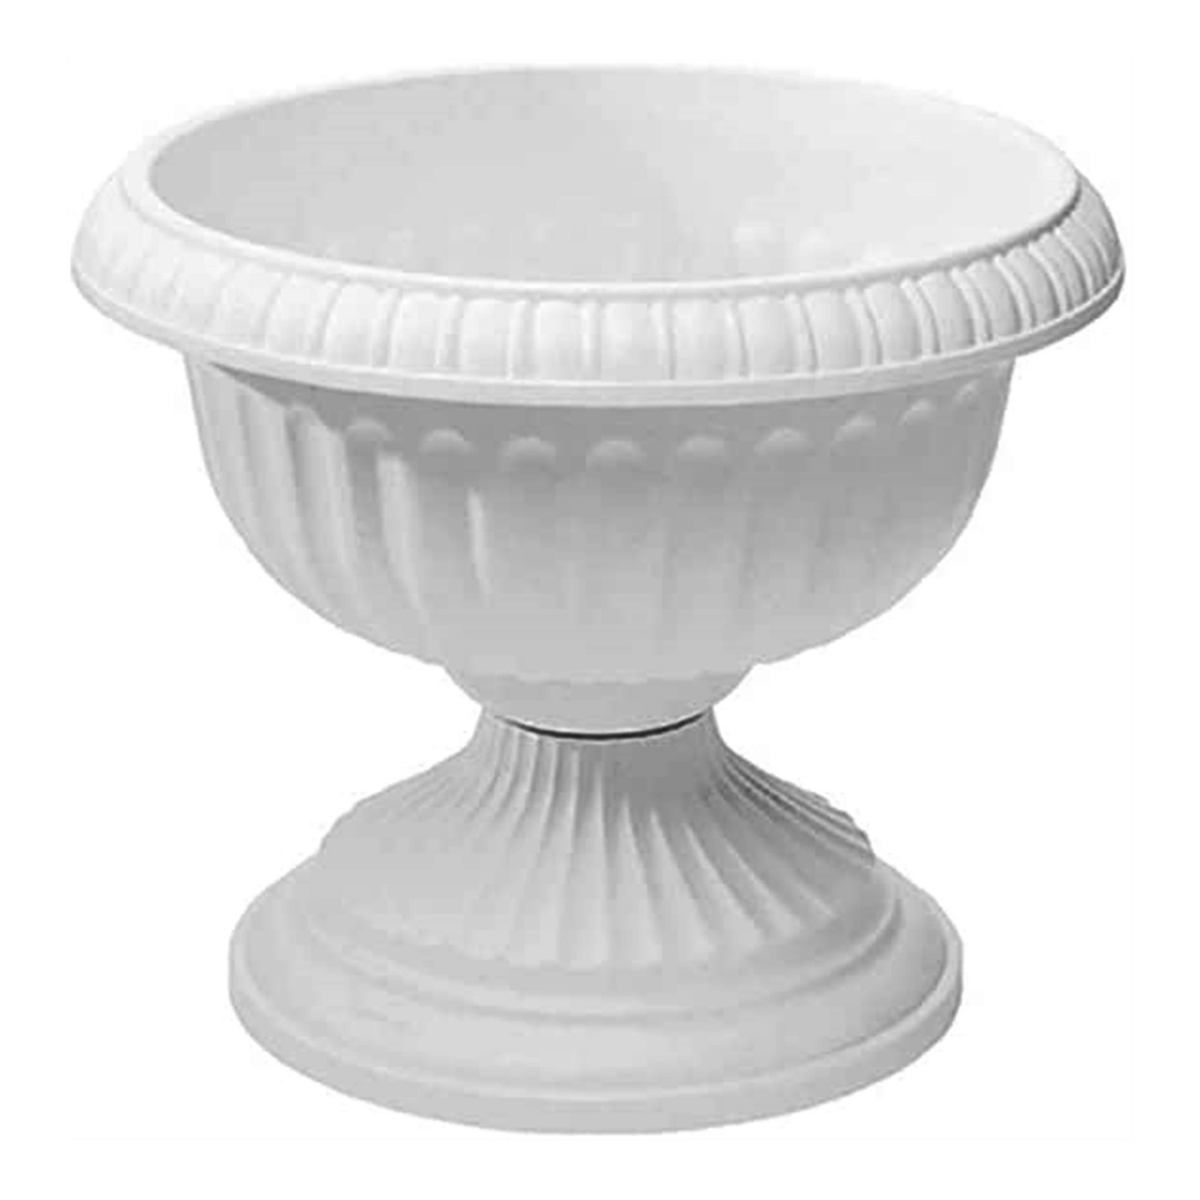 Grecian Urn Plastic Planter for Indoor/Outdoor Use, Stone Colored, 12 inch - White